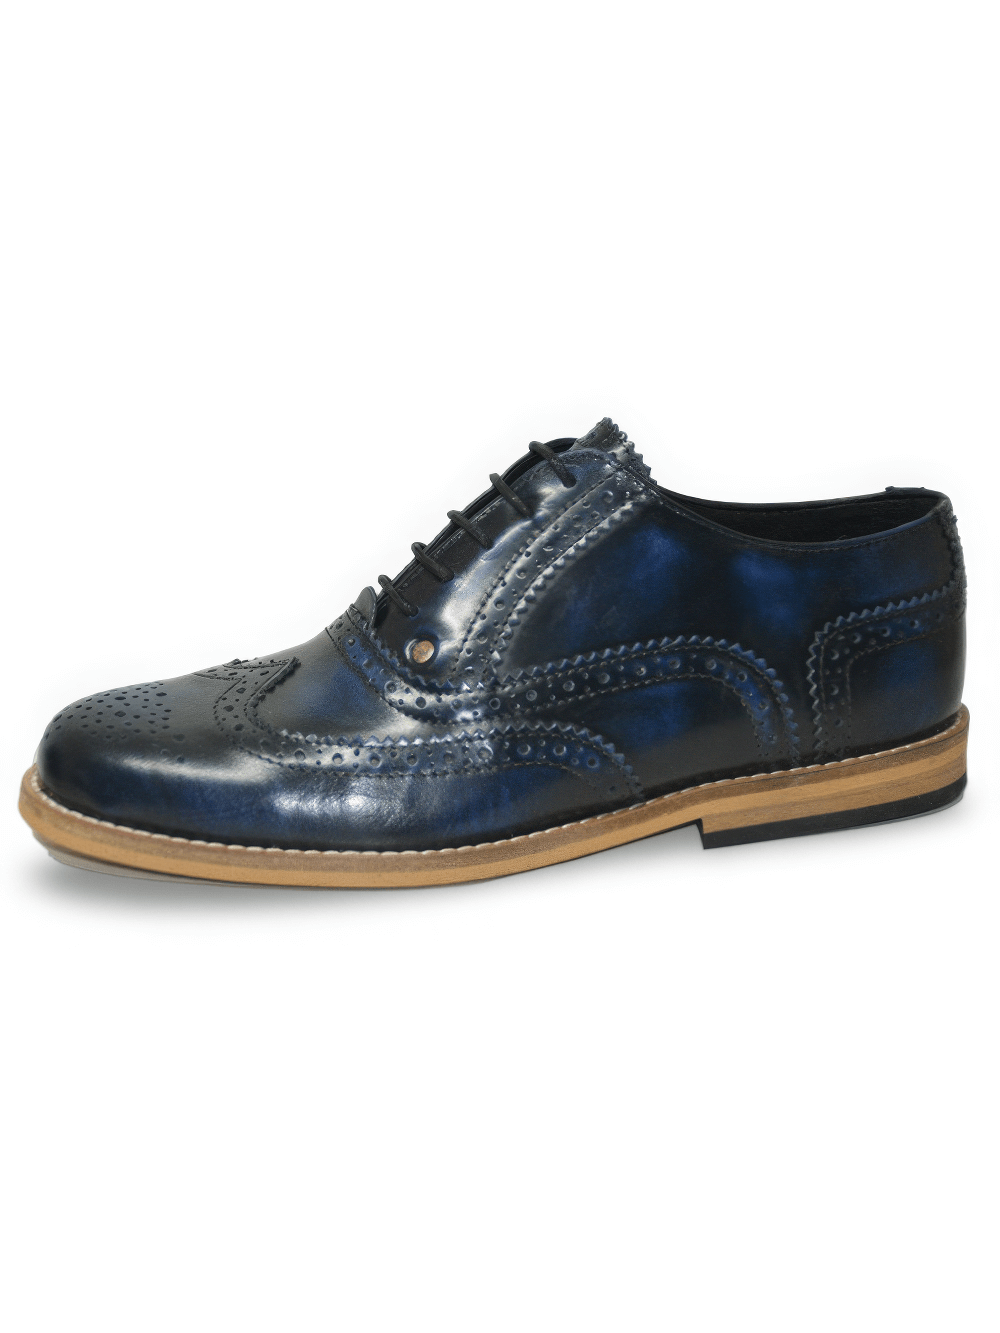 Unisex Blue Leather Oxford Shoes with Flat Neolite Sole